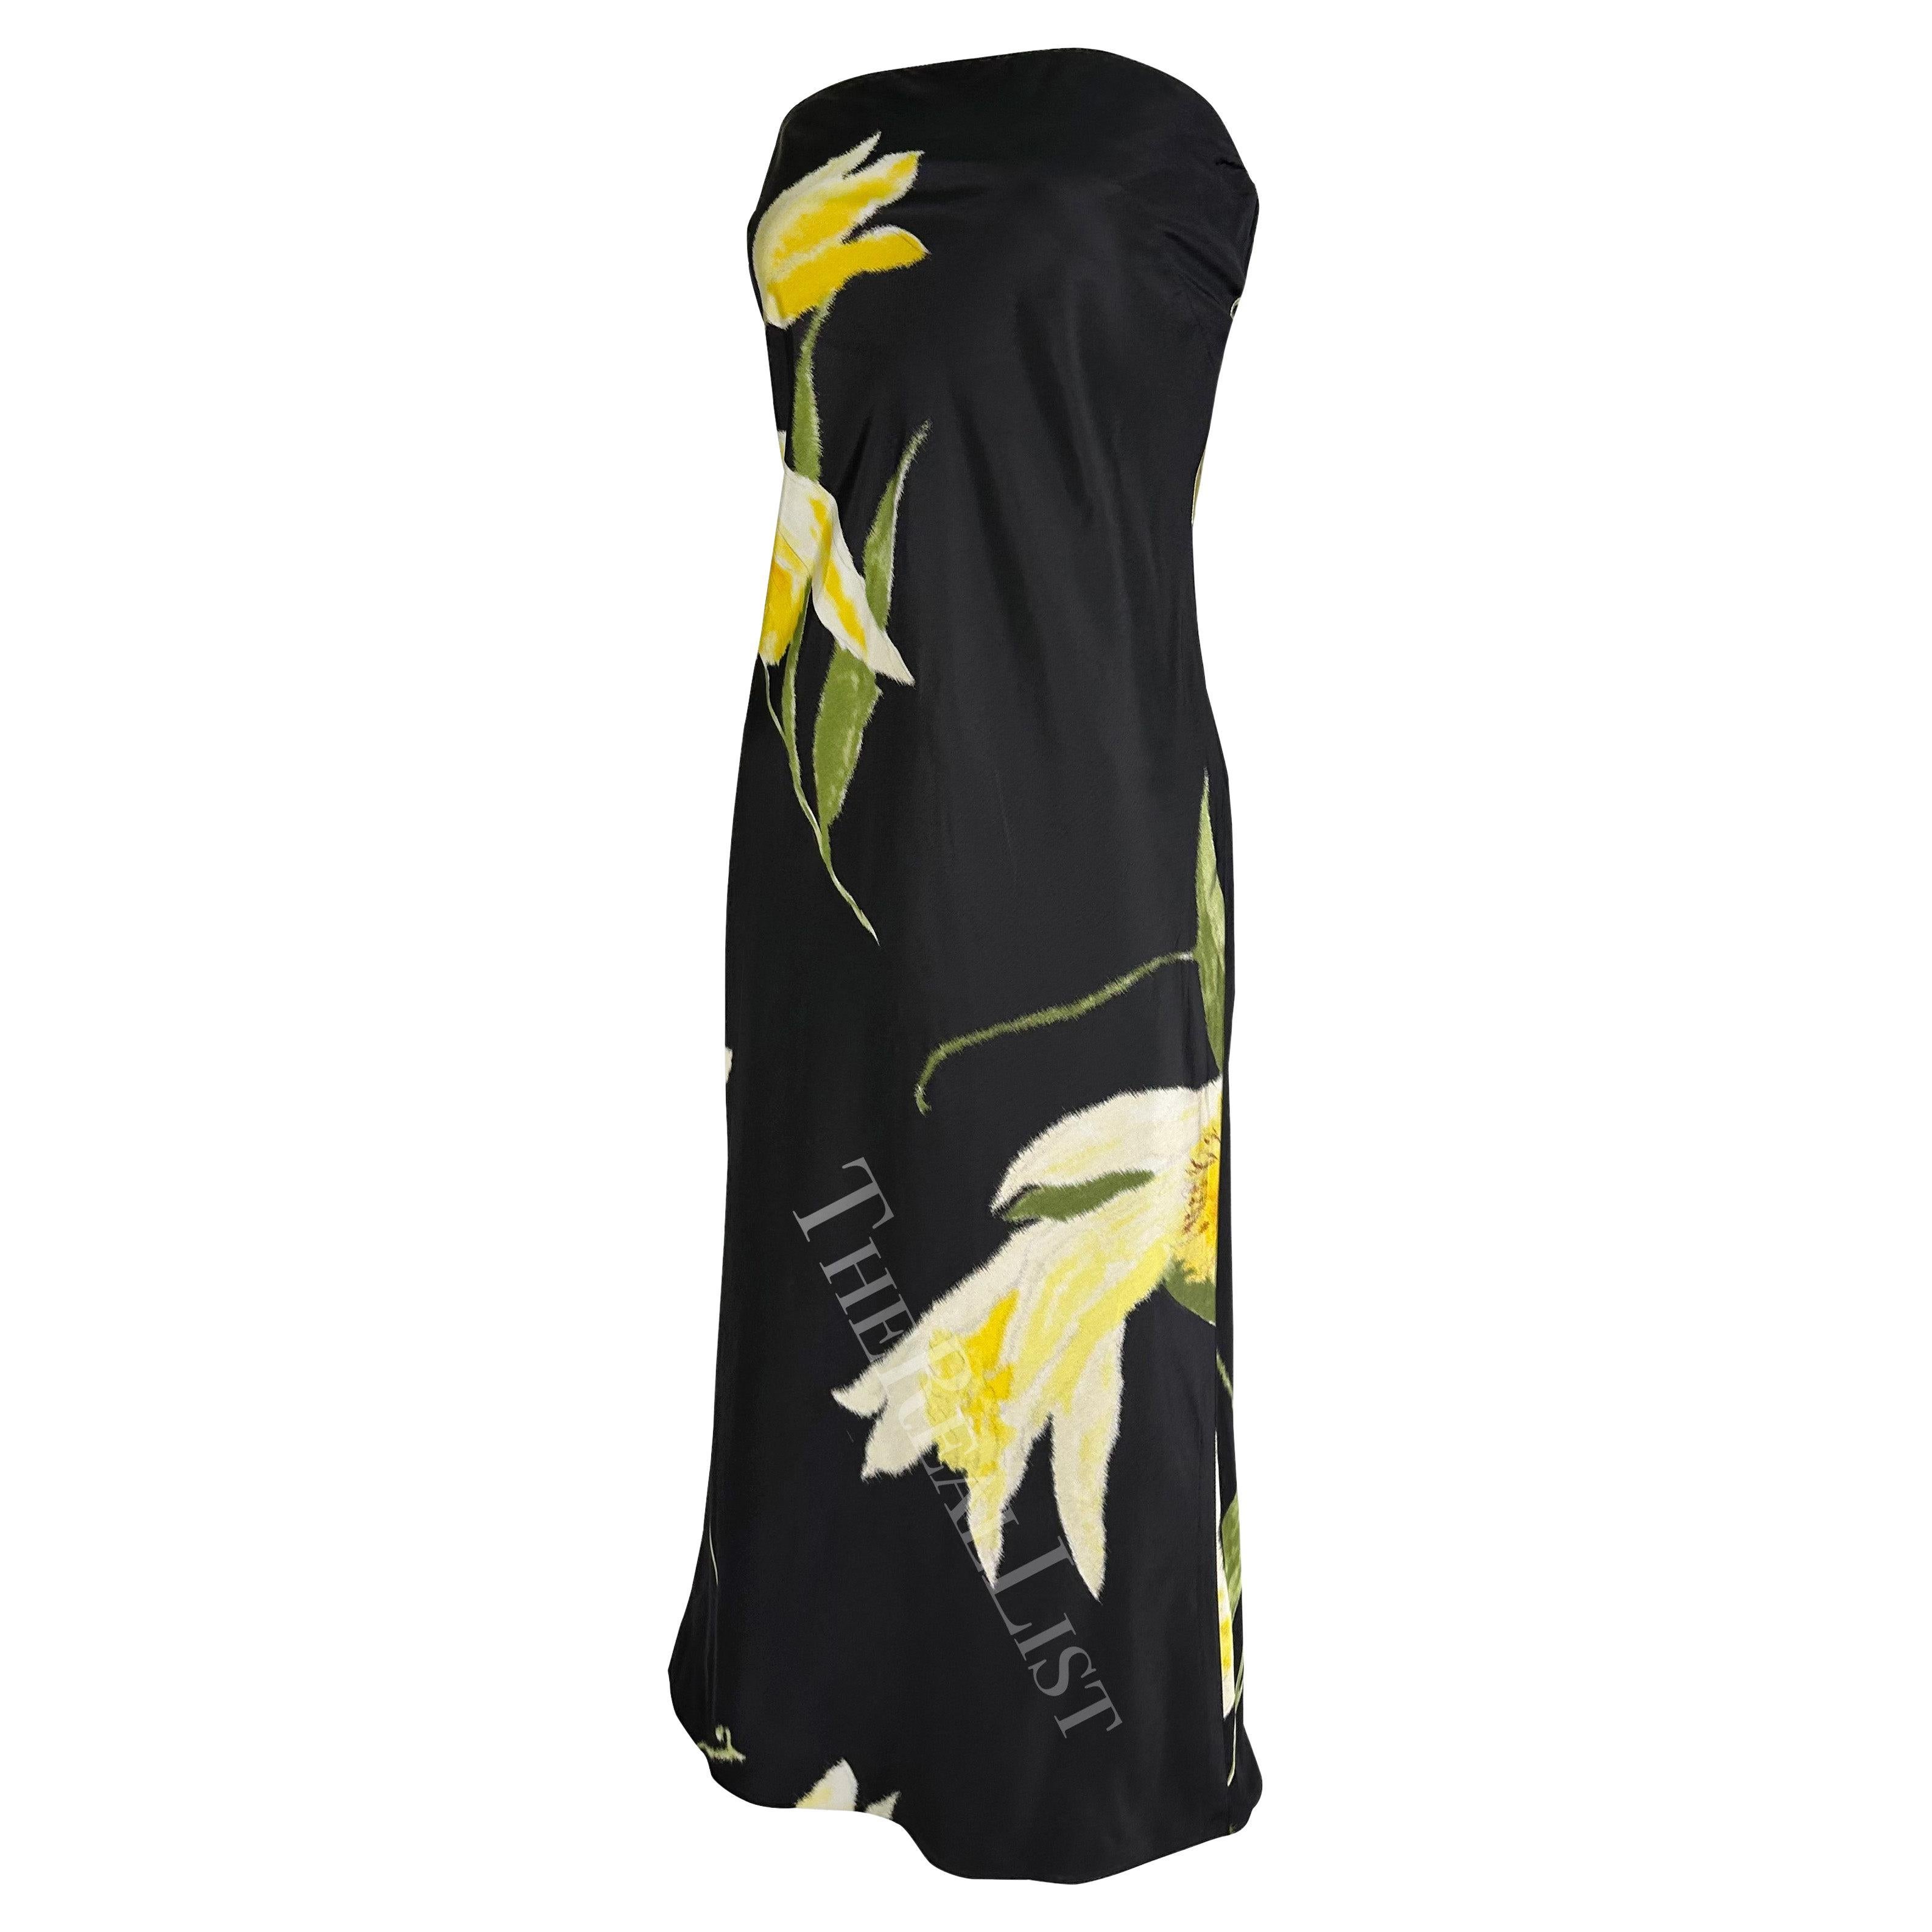 S/S 2000 Ralph Lauren Runway Black Yellow Floral Strapless Cocktail Dress For Sale 1